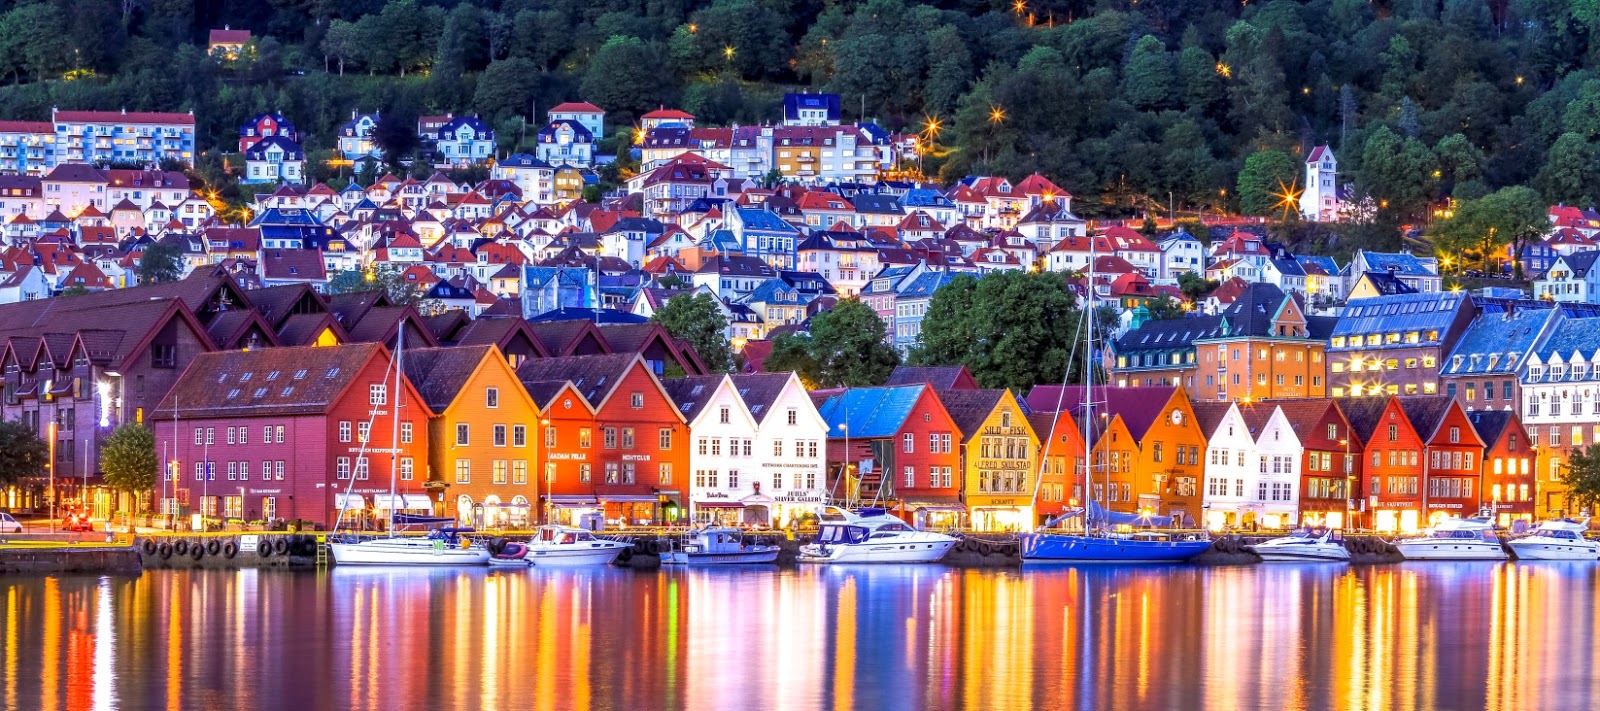 Van defile Decimal 10 Most Beautiful Places in Norway | Blogs, Travel Guides, Things to Do,  Tourist Spots, DIY Itinerary, Hotel Reviews - Pinoy Adventurista